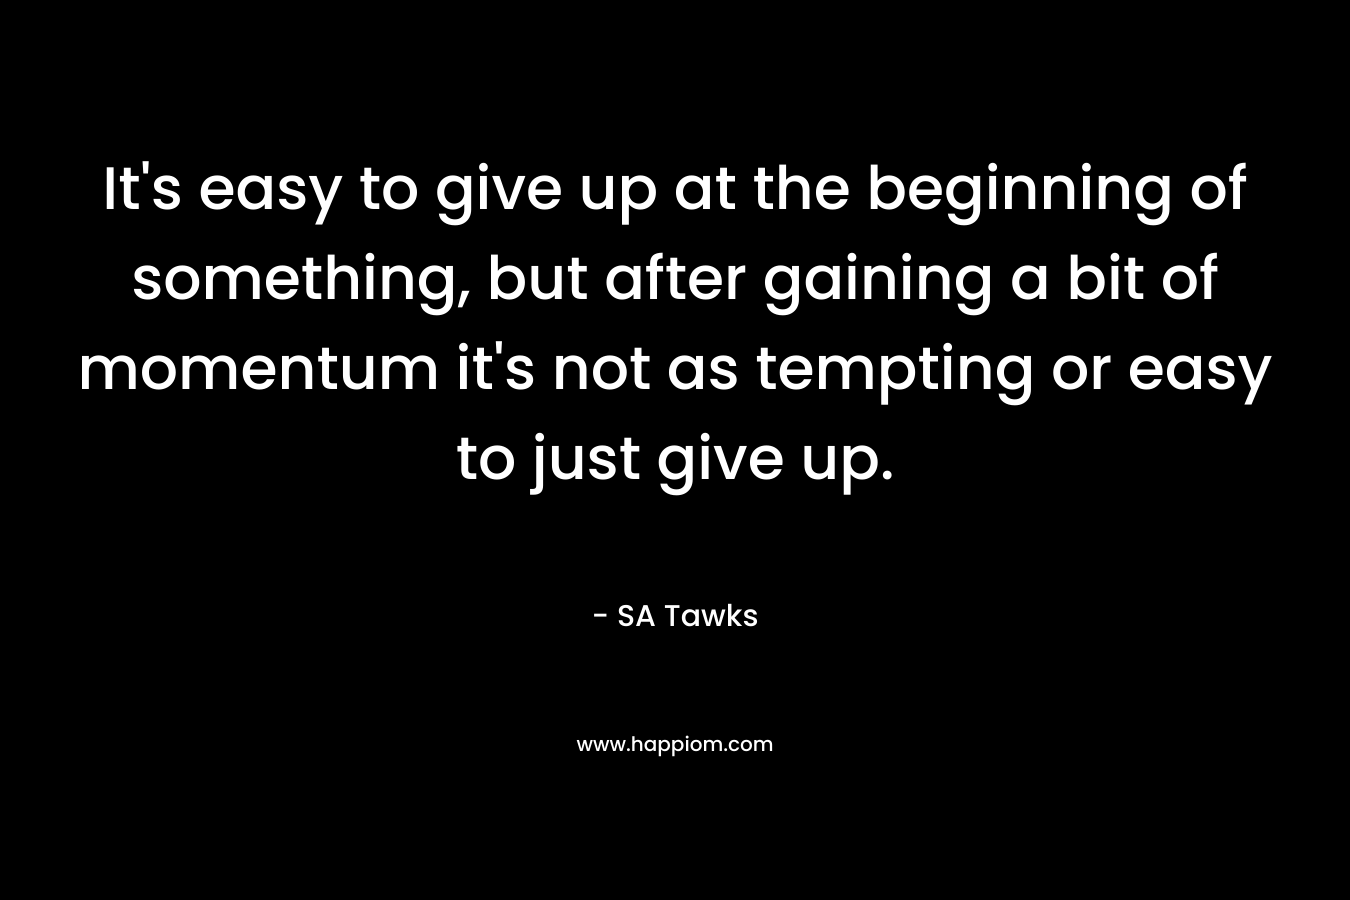 It’s easy to give up at the beginning of something, but after gaining a bit of momentum it’s not as tempting or easy to just give up. – SA Tawks